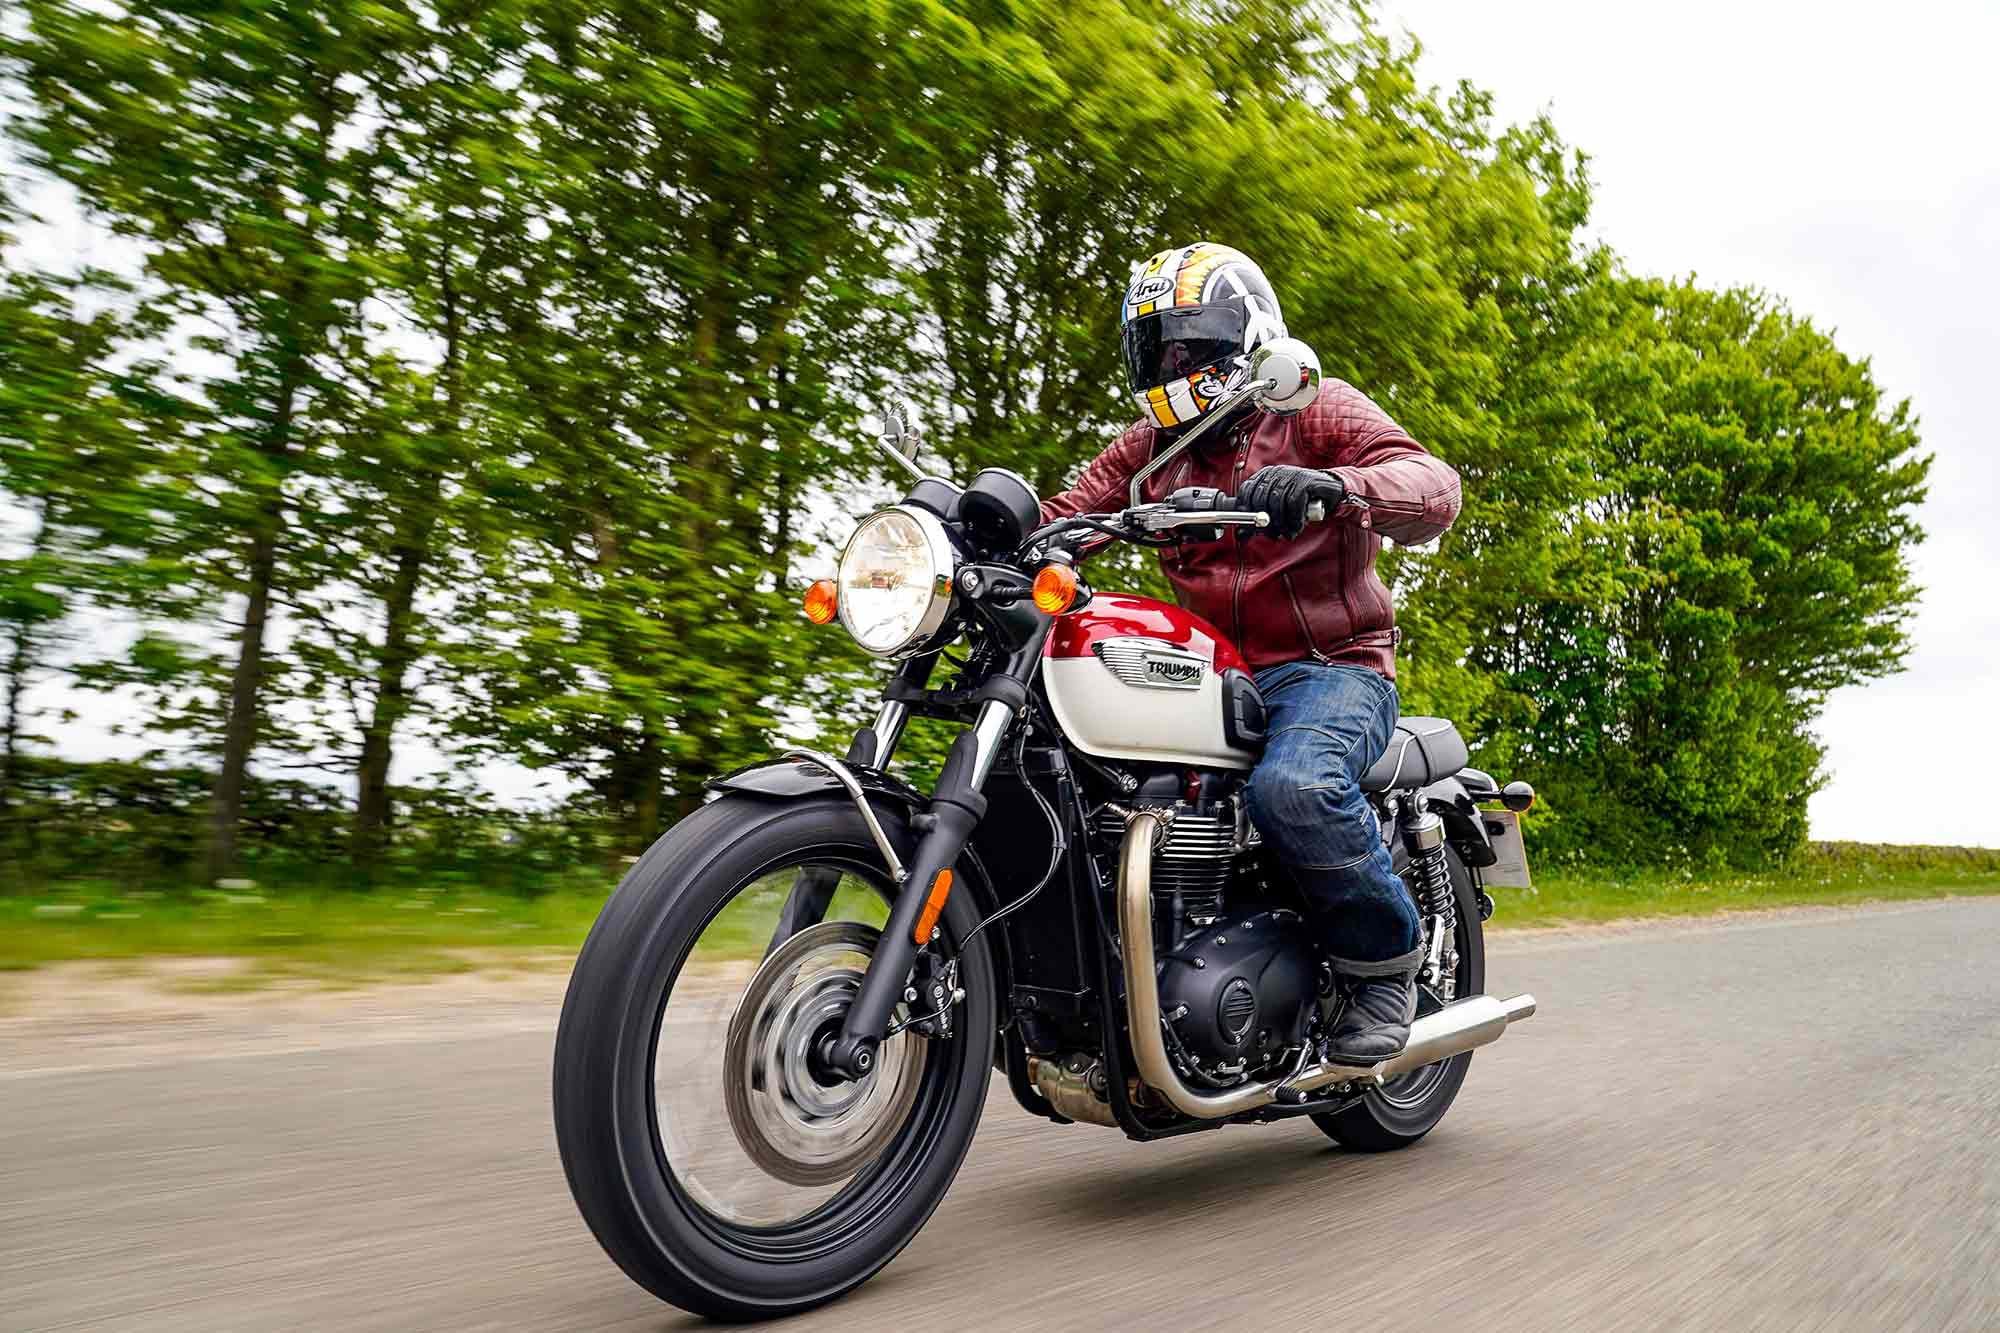 Triumph essentially offers two models: the Bonneville T120 1,200cc, and the bike we have on test, the “entry-level” T100, a 900cc parallel twin with a slightly lower spec than the T120 but priced more affordably.